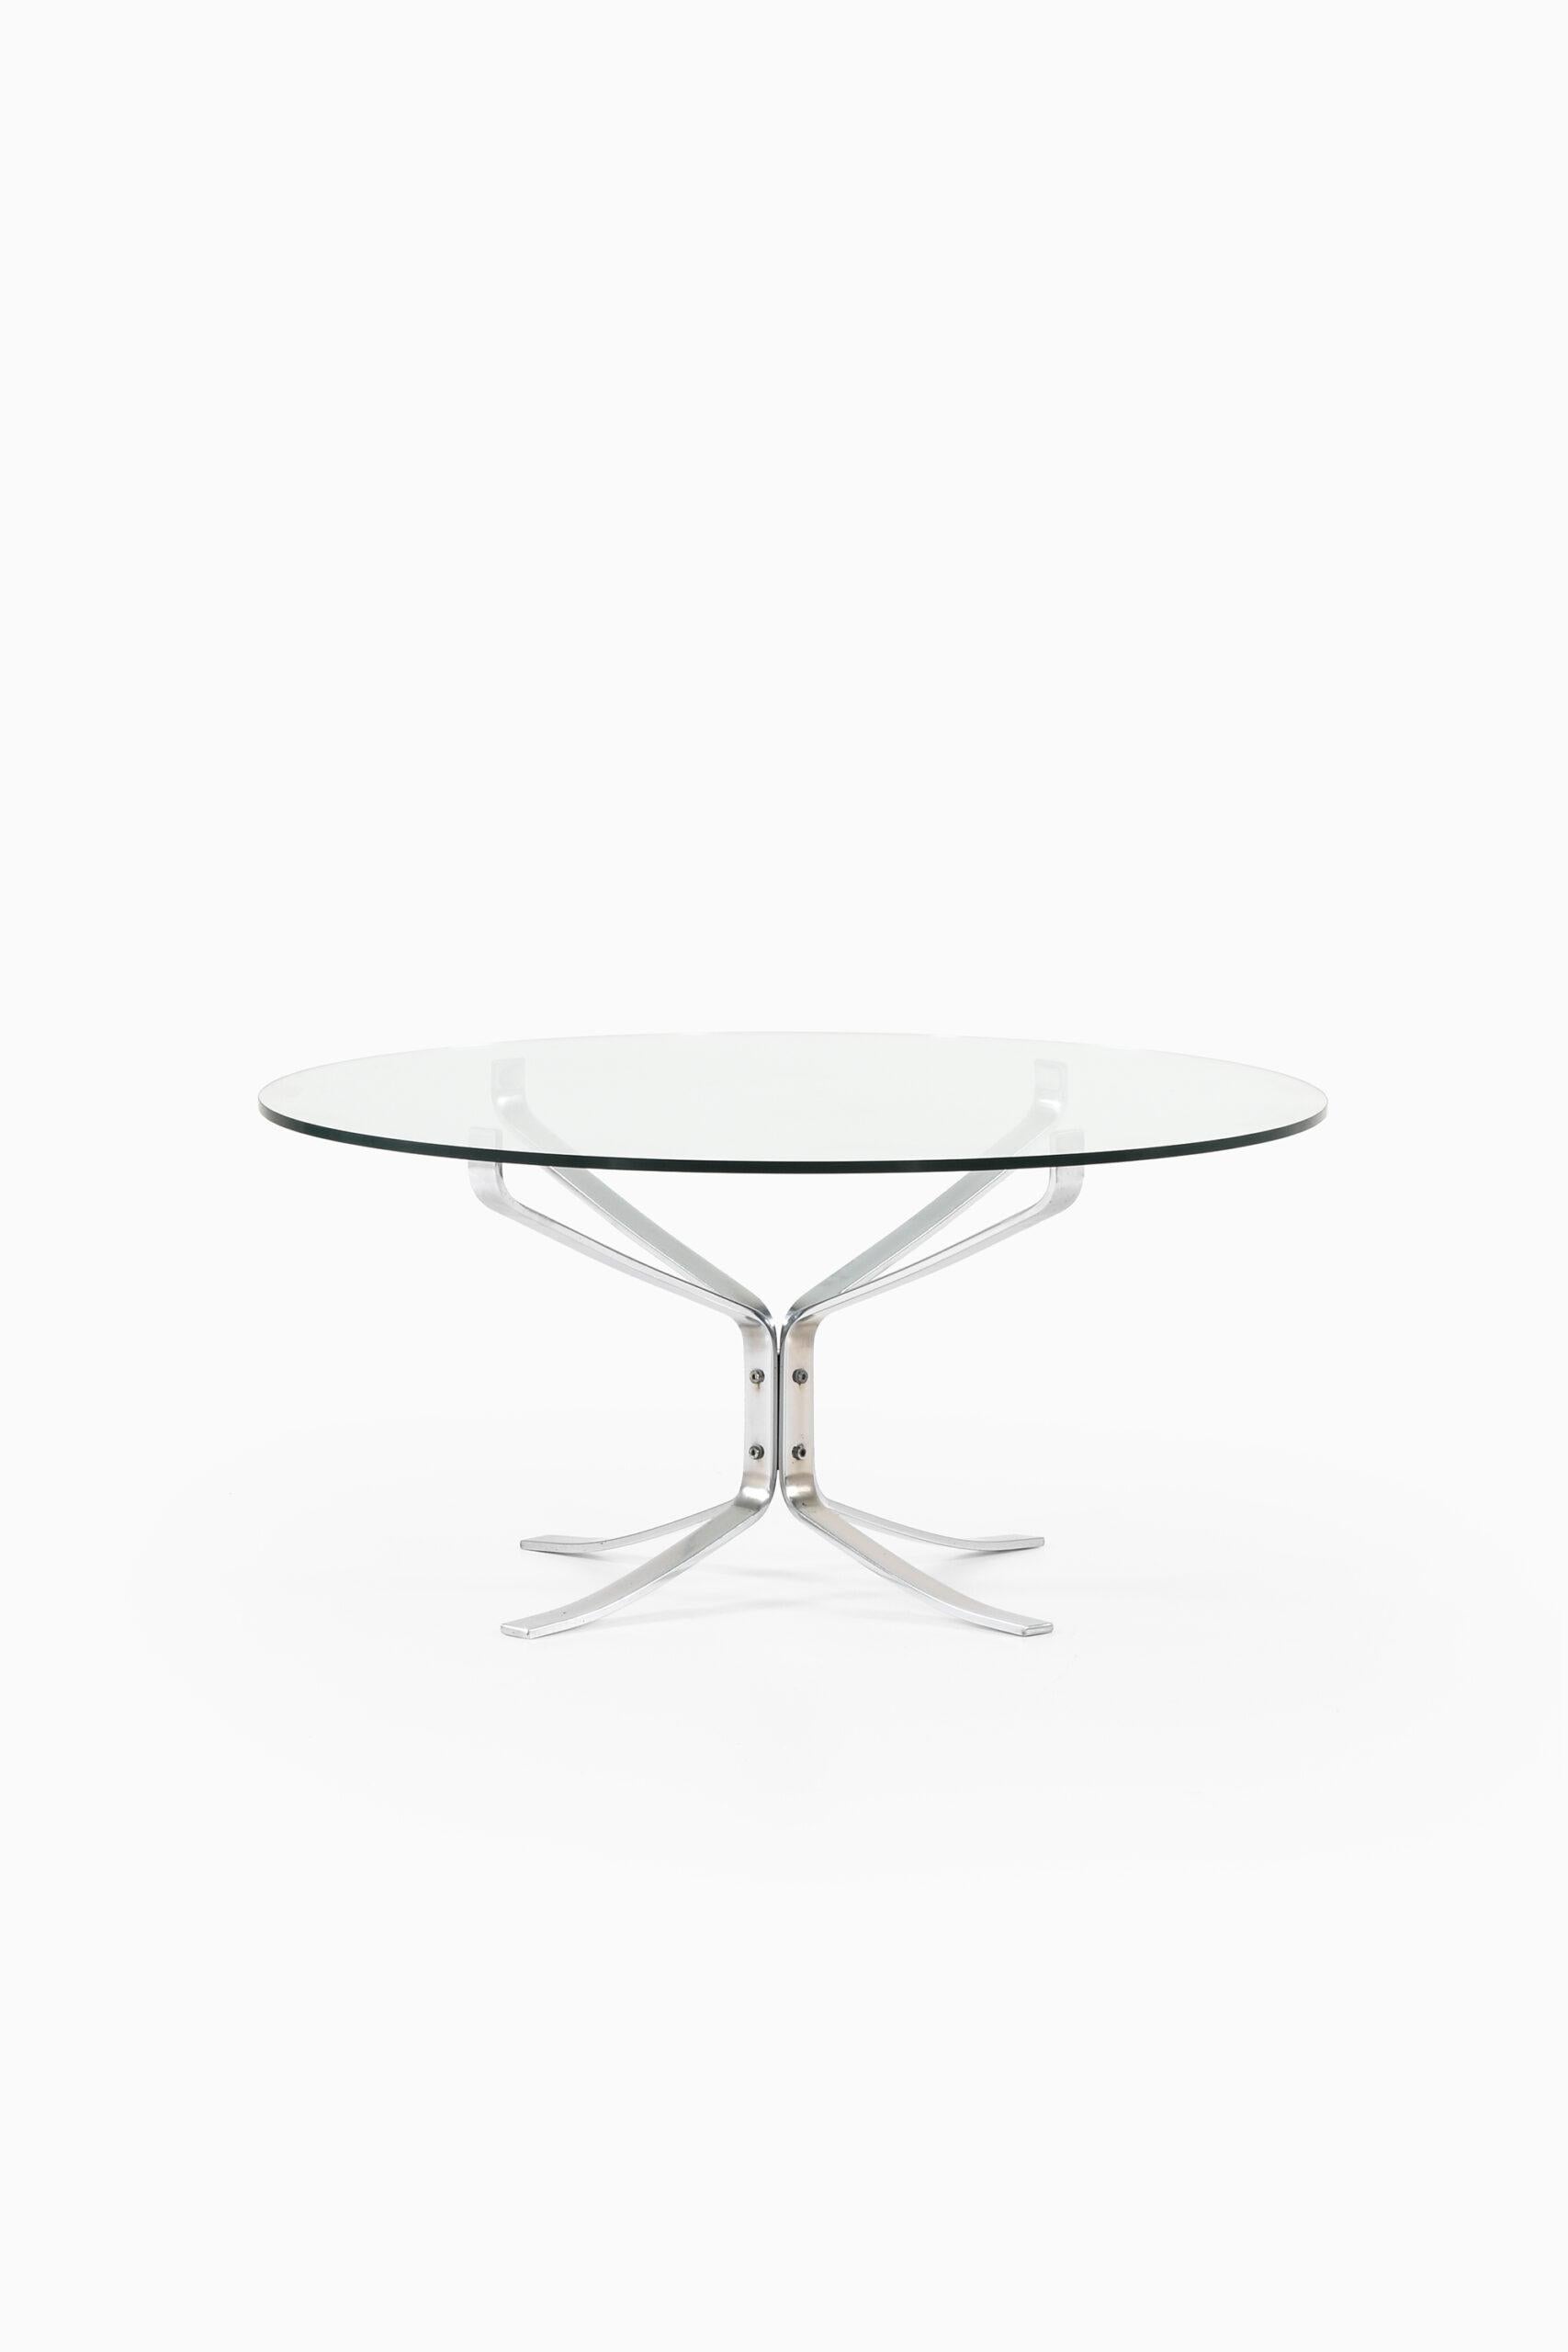 Norwegian Sigurd Resell Coffee Table Produced by Vatne Möbler in Norway For Sale